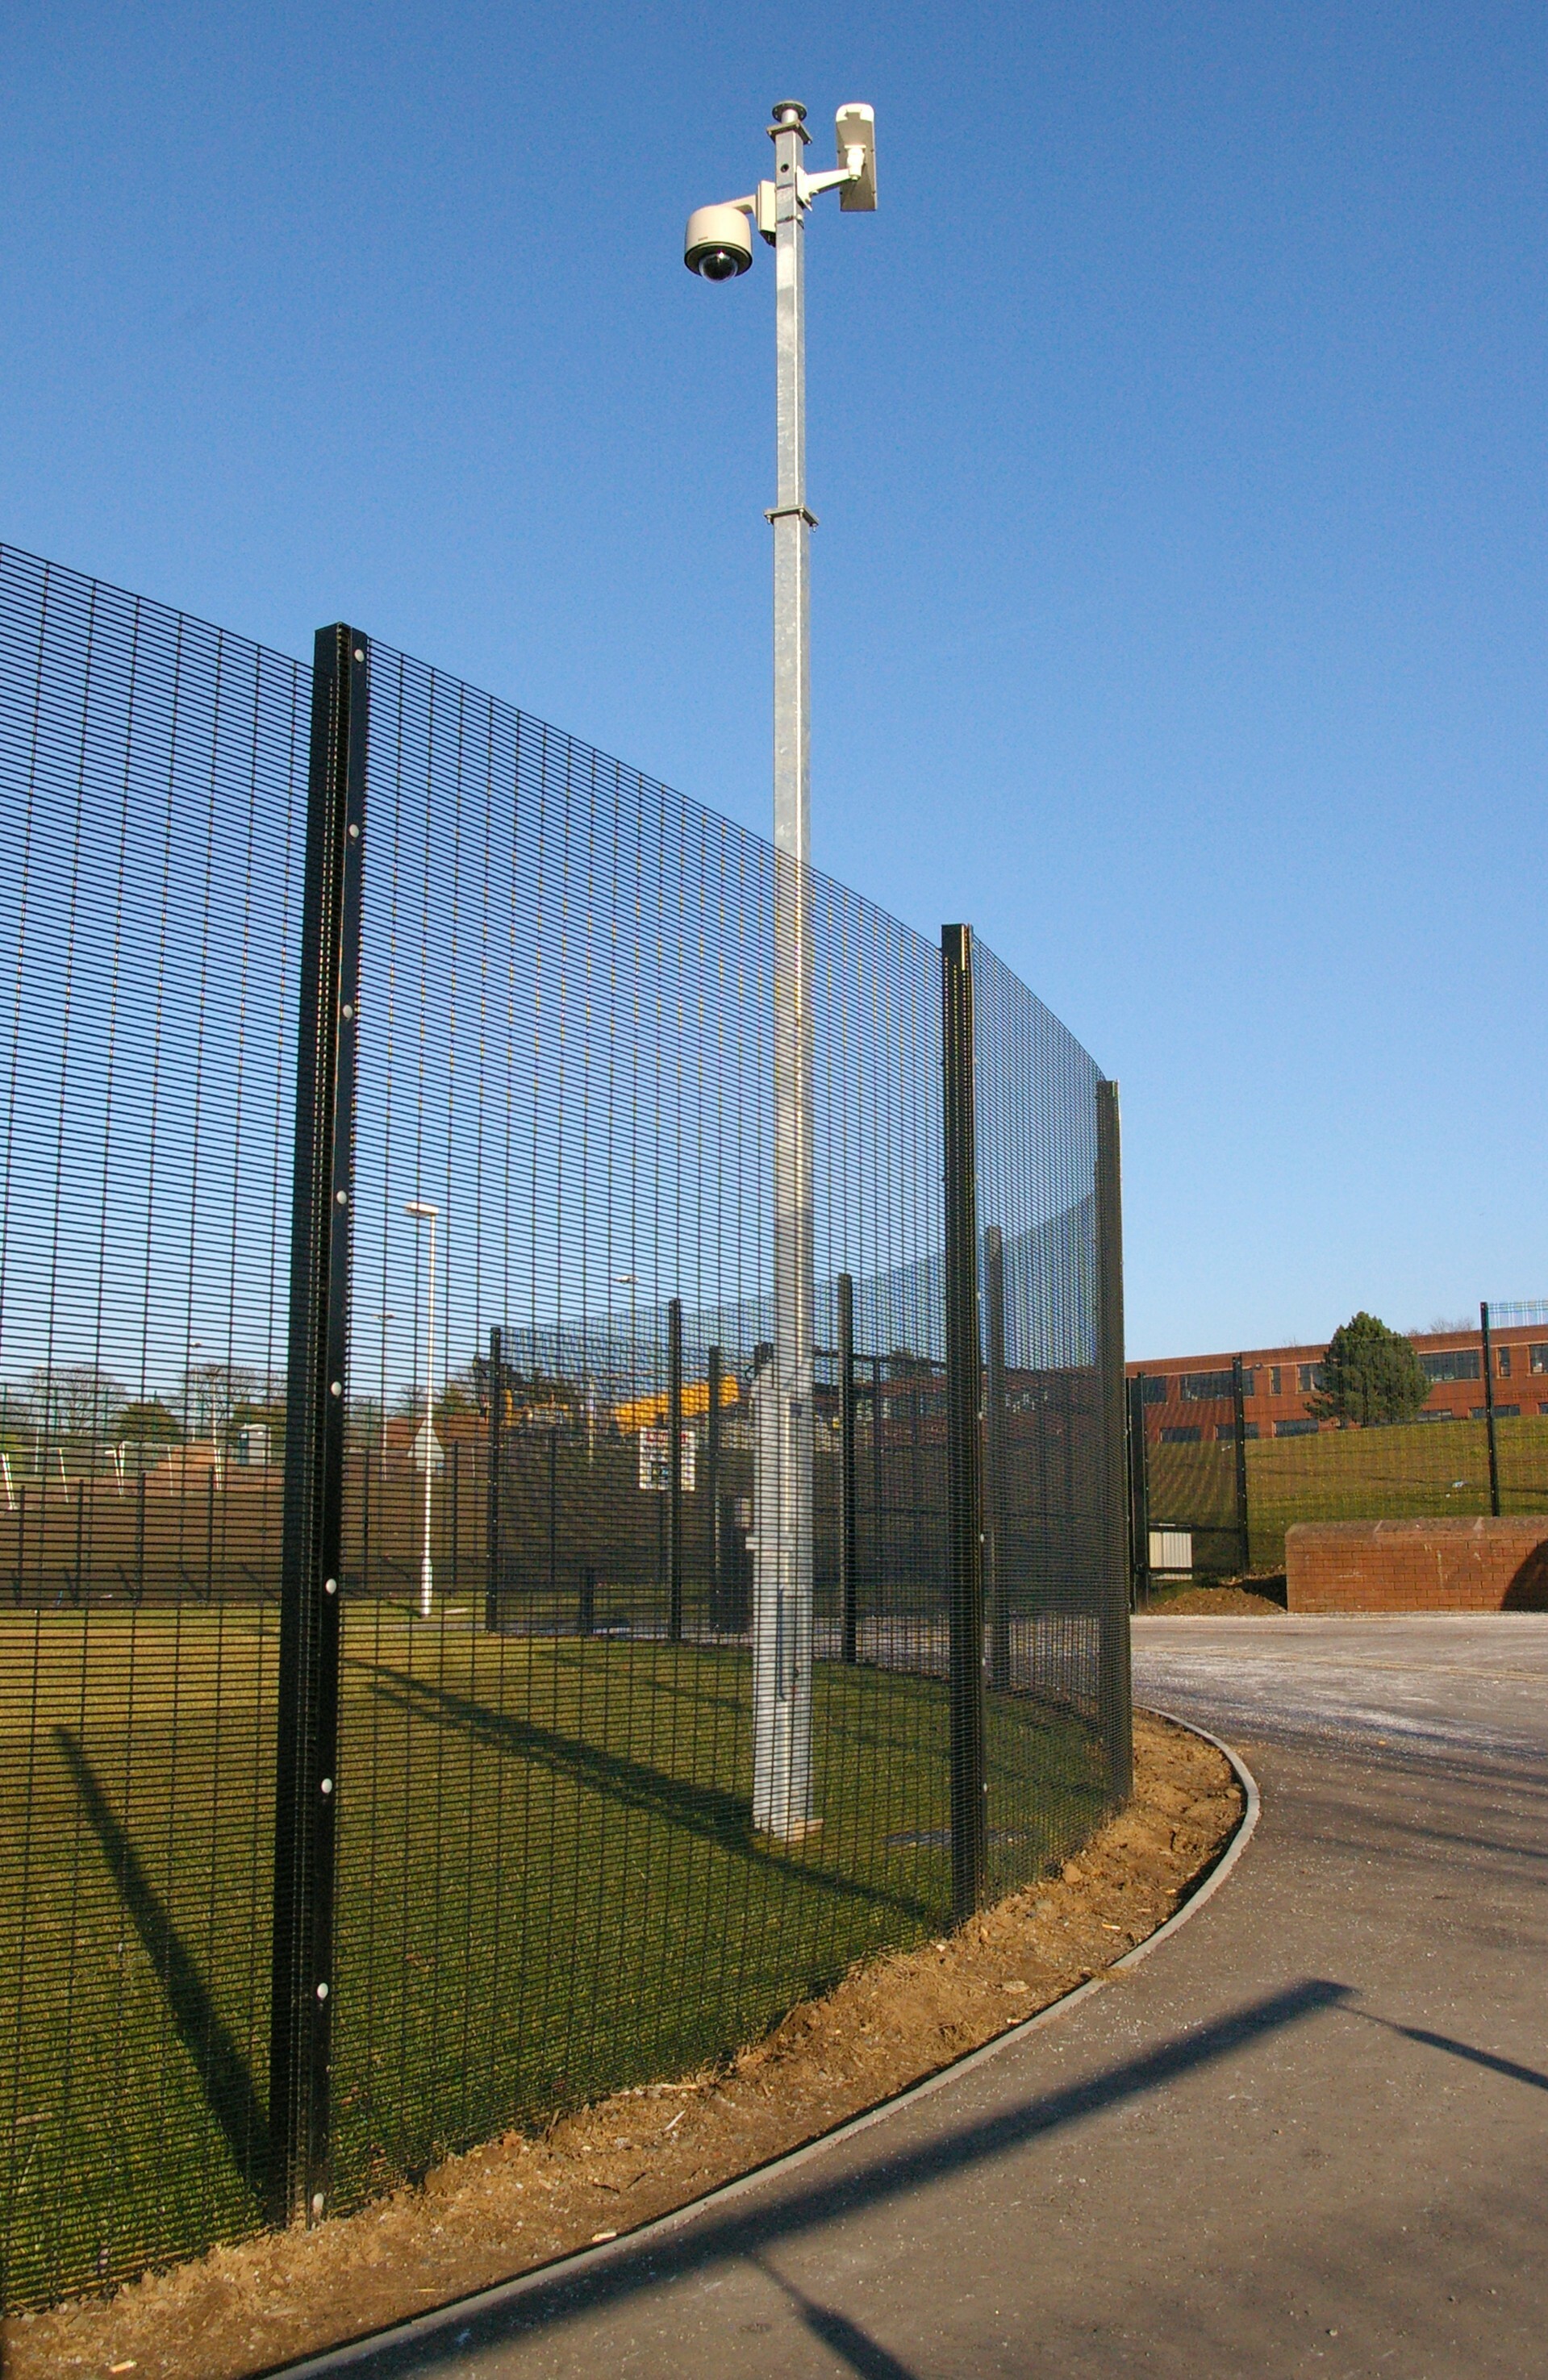 High Security SR rated fencing